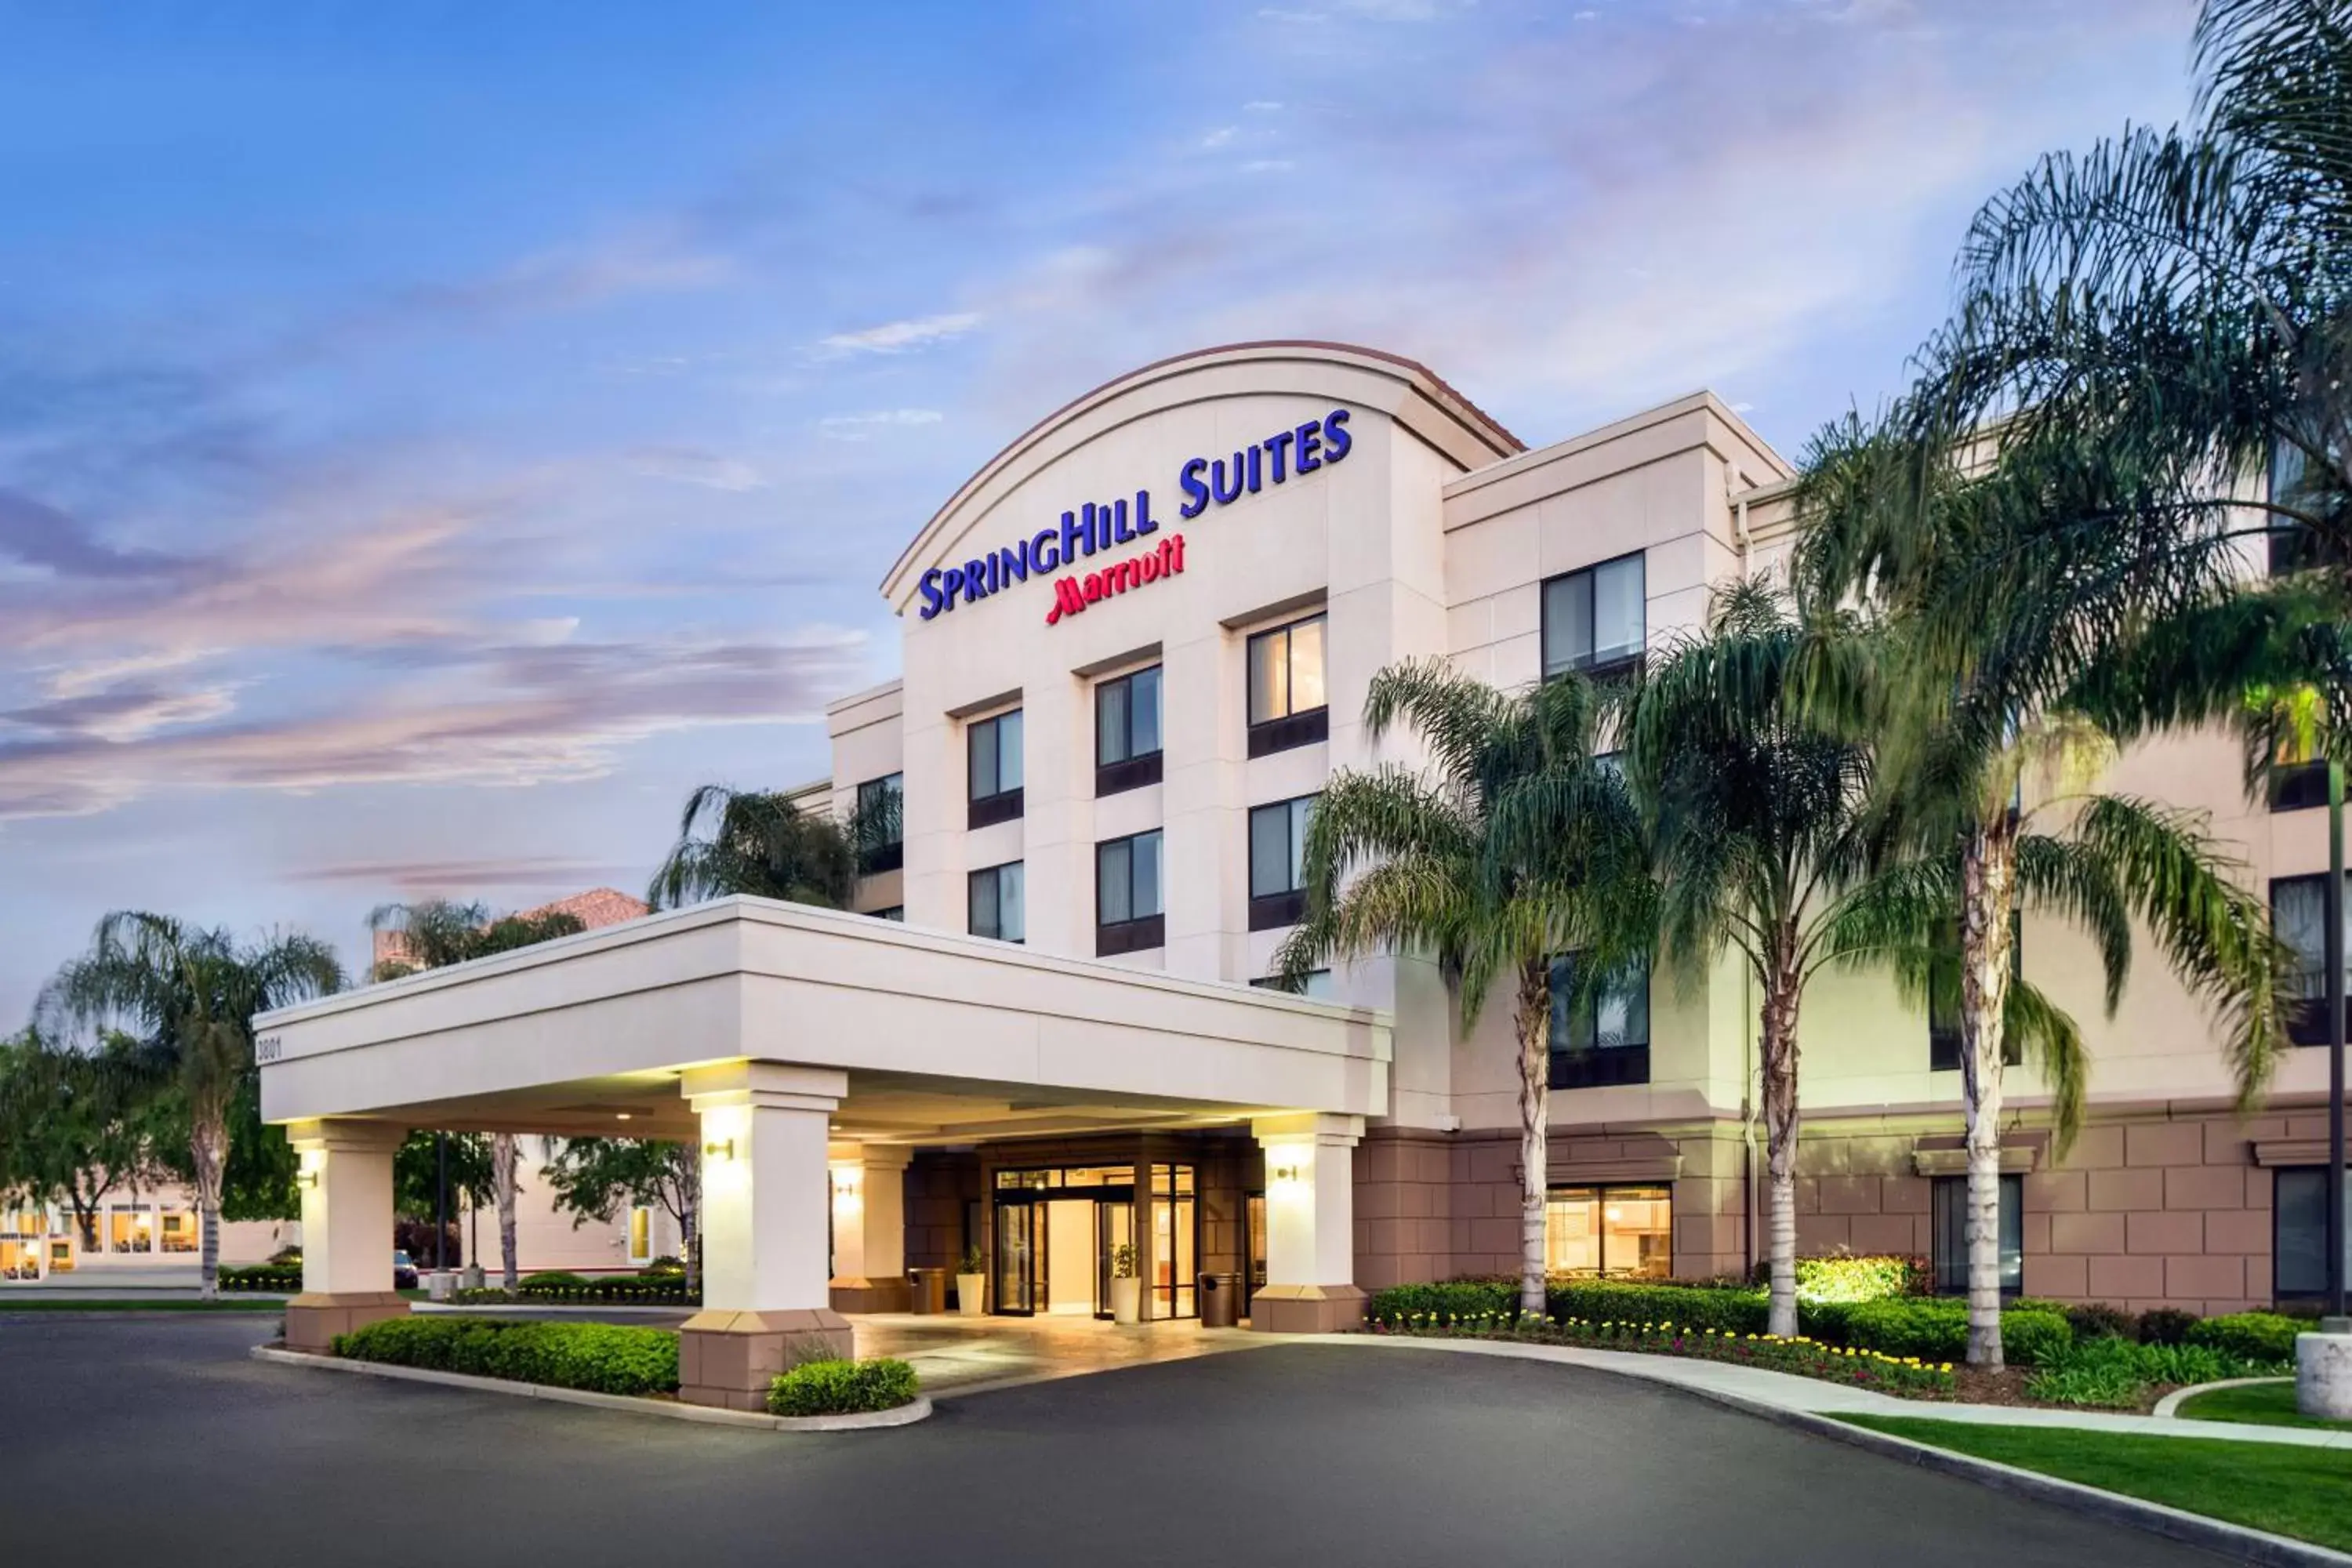 Property Building in SpringHill Suites Bakersfield